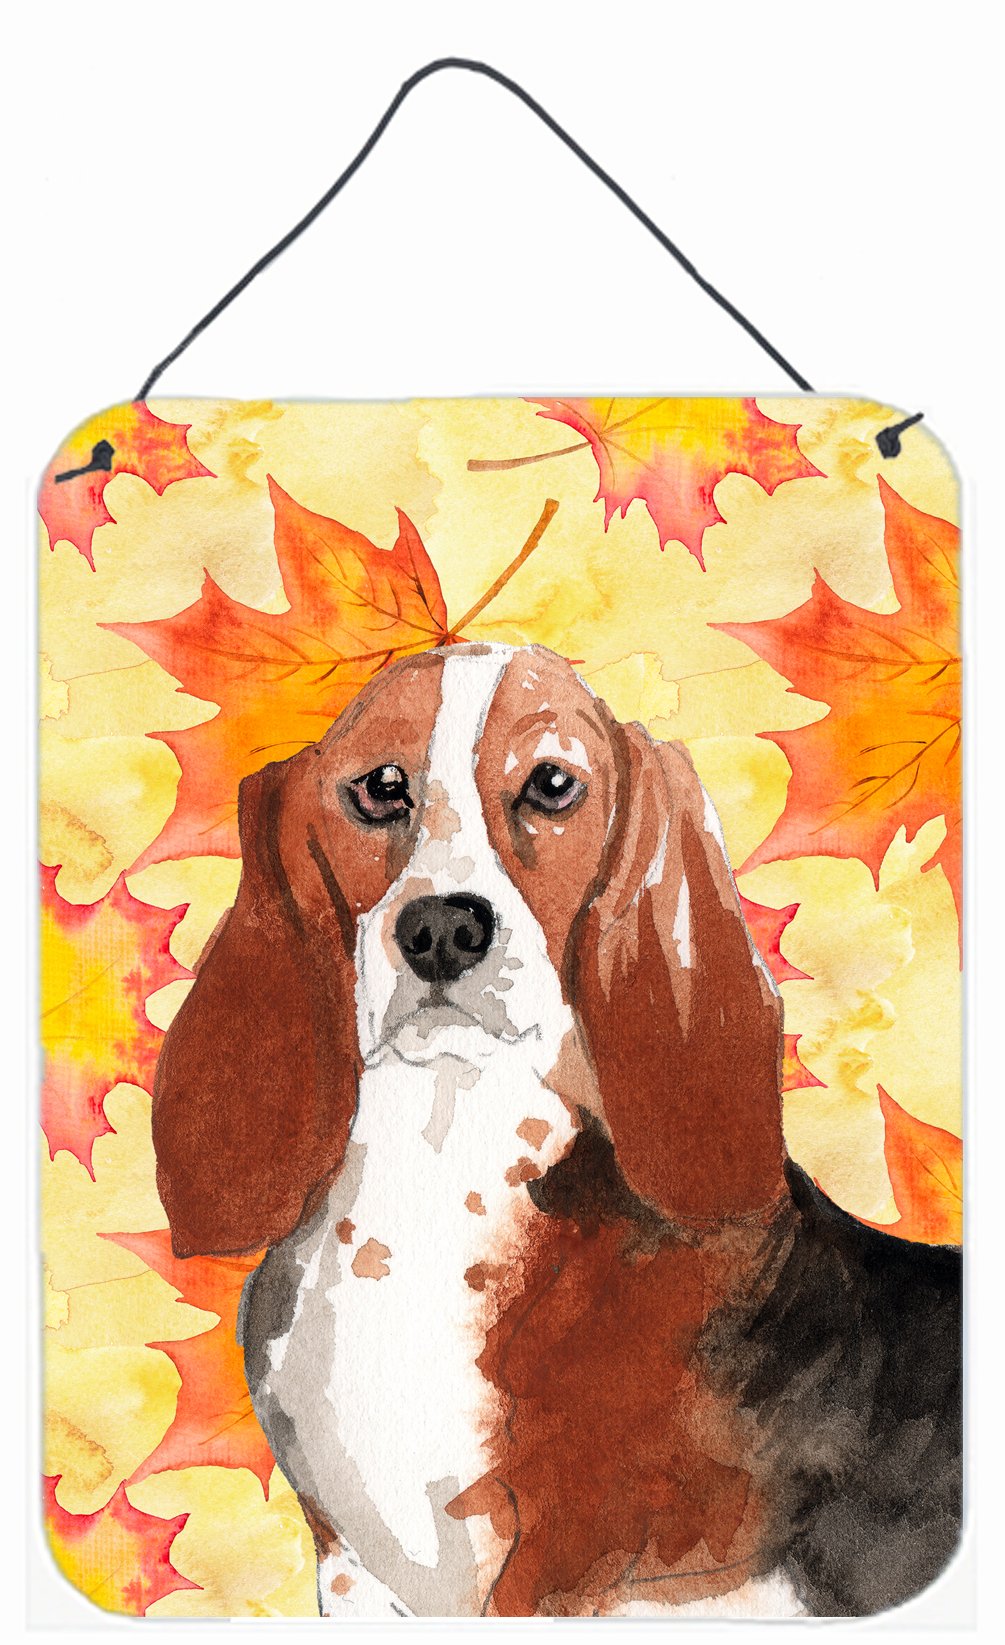 Fall Leaves Basset Hound Wall or Door Hanging Prints CK1853DS1216 by Caroline's Treasures